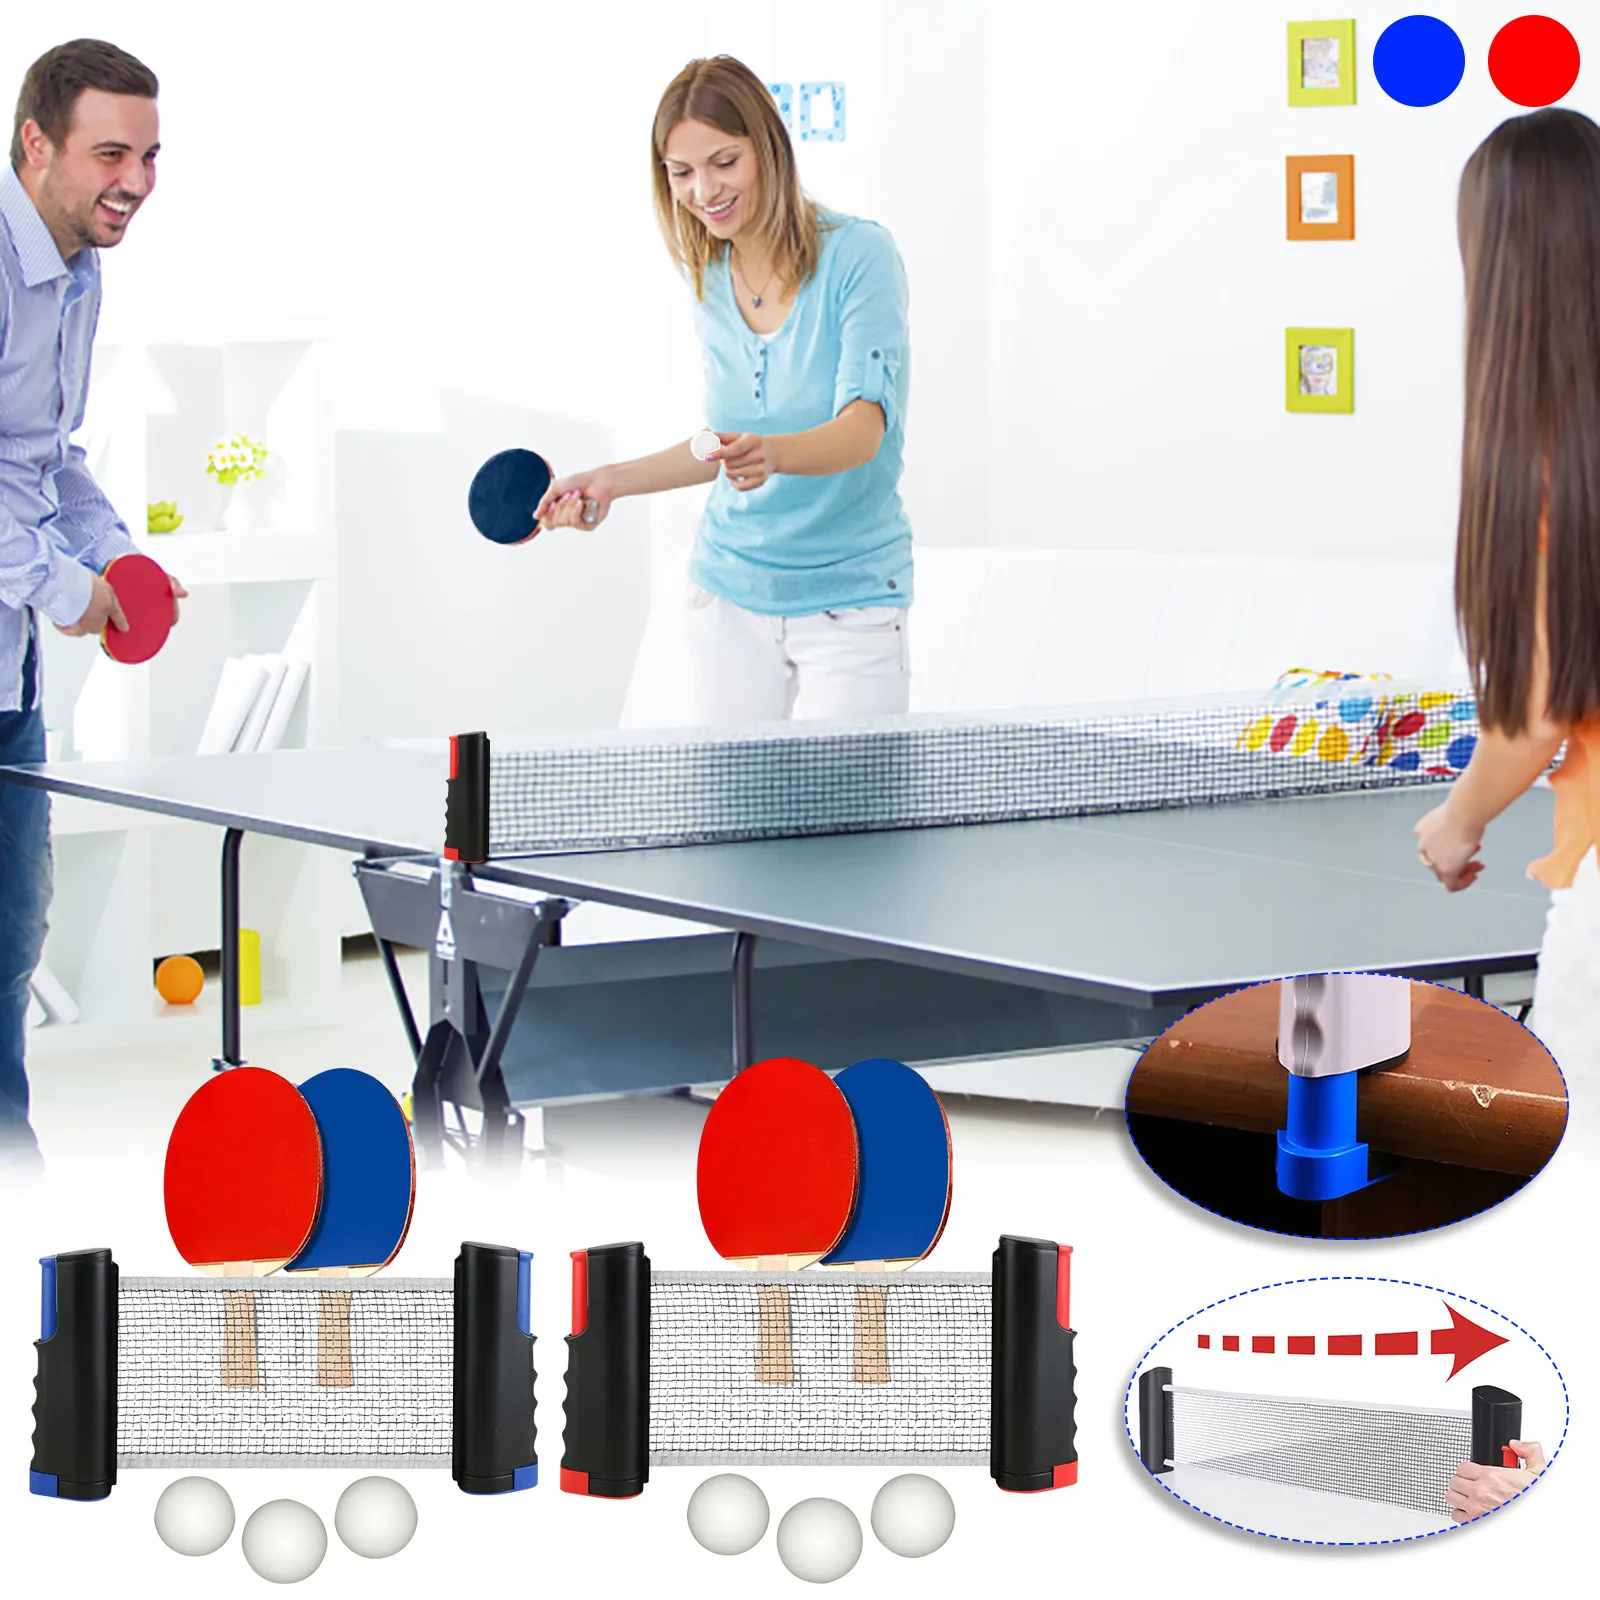 Replacement Retractable Table Tennis Ping Pong Portable Net Kits Indoor 4 Colors 